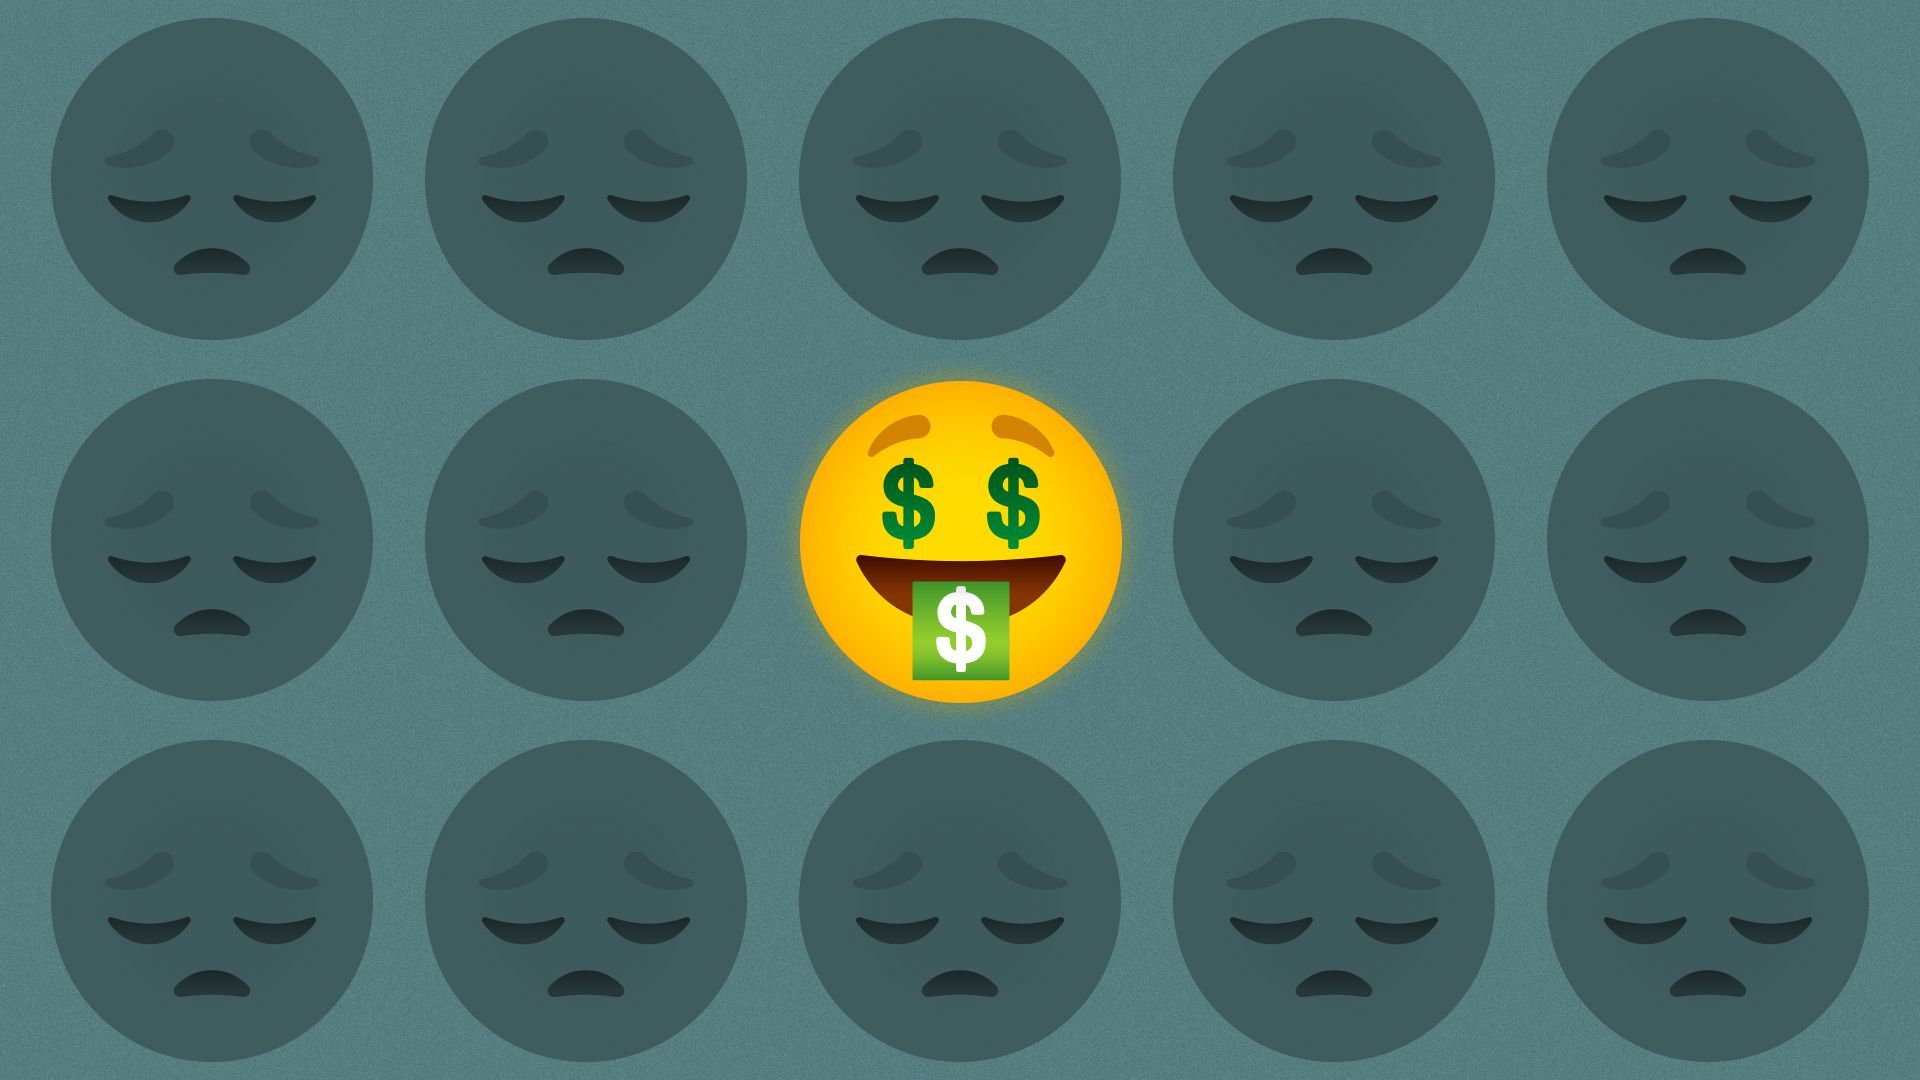 Illustration of a smiling emoji with dollar signs, surrounded by sad emoji.